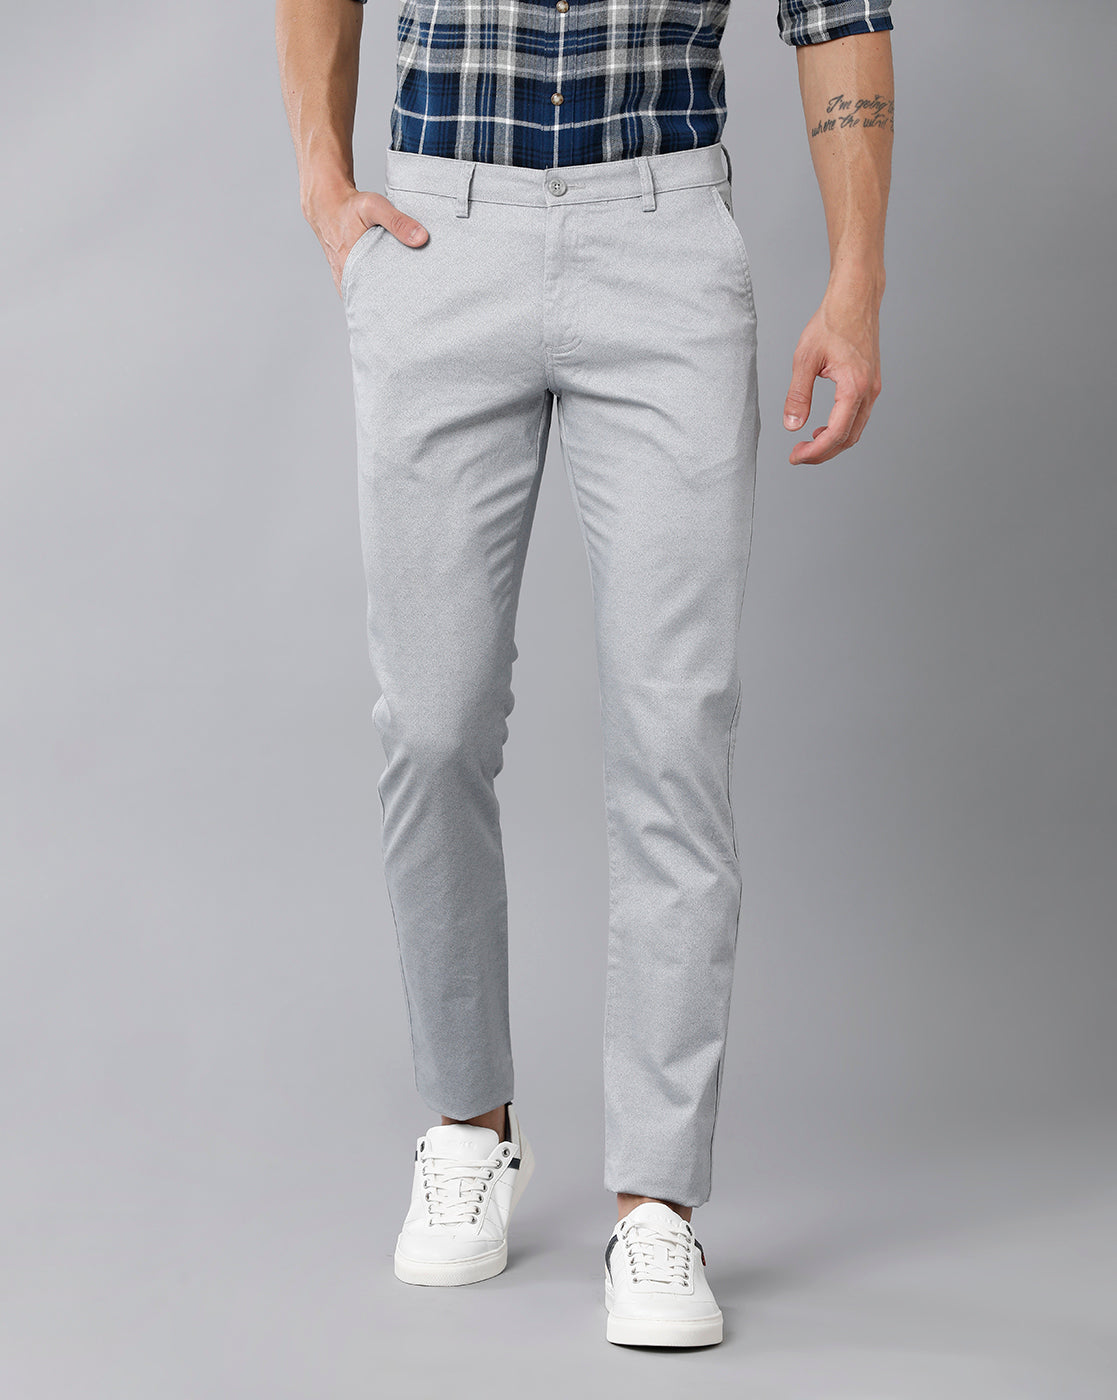 Beige Color Casual Trouser  CANOE TRENDS